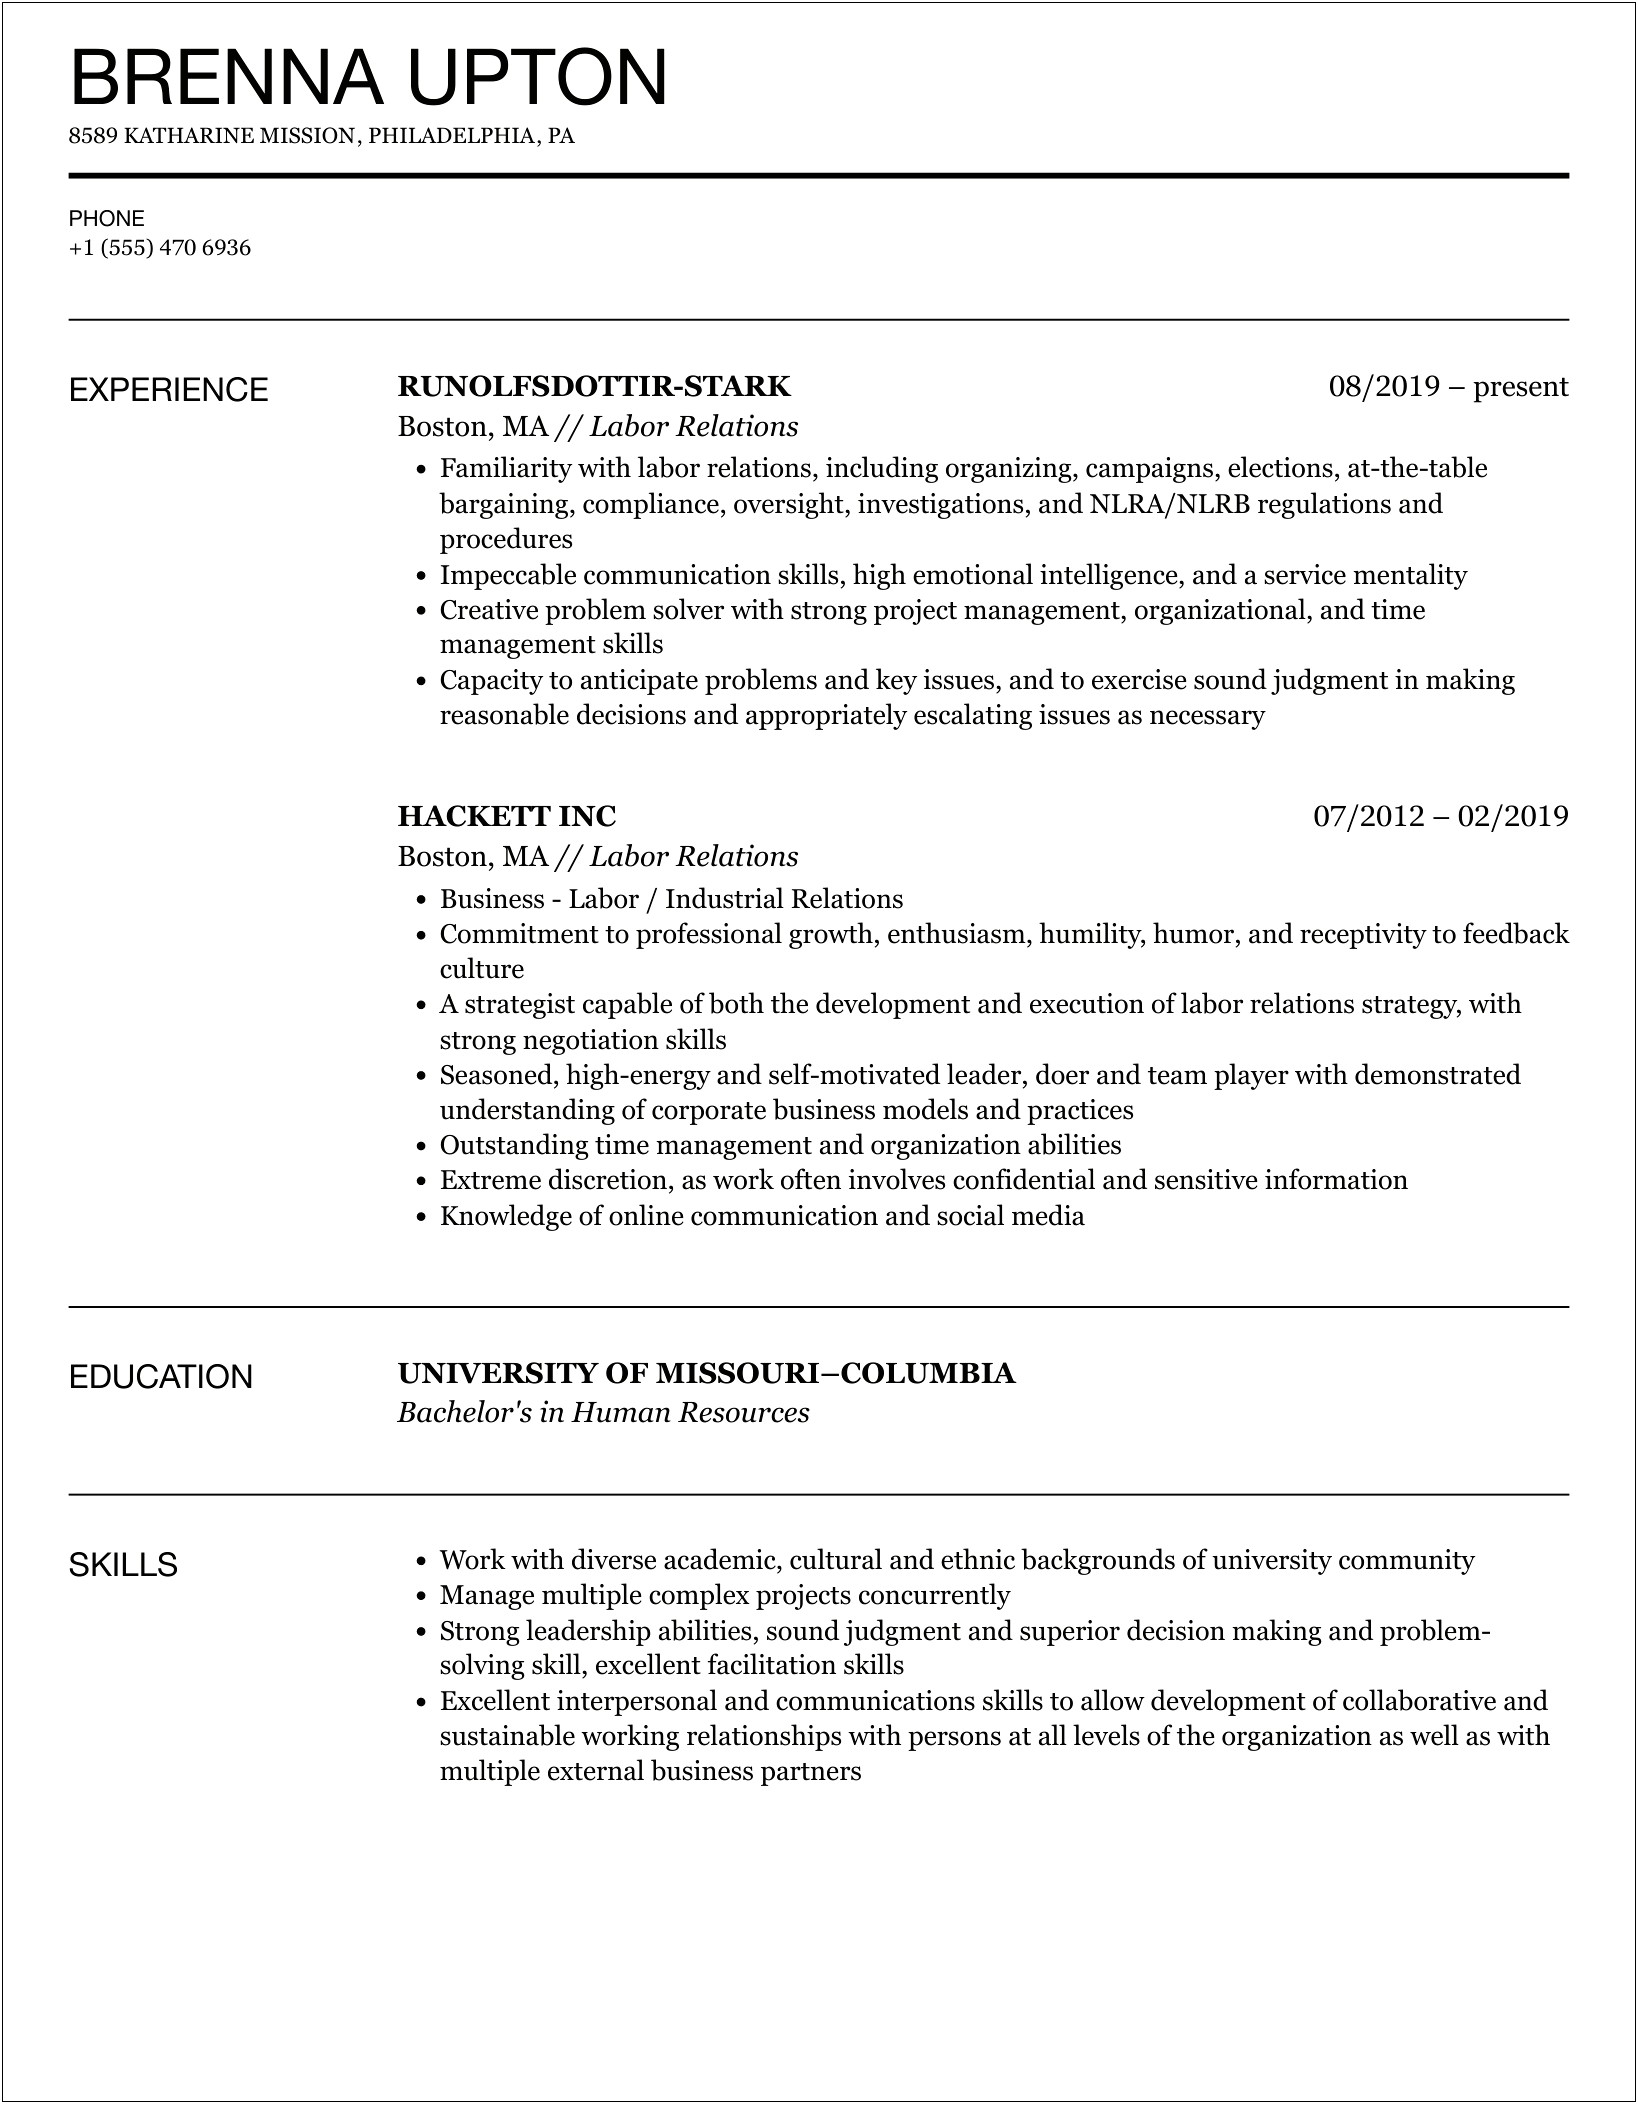 Leading In A Union Free Workplace Resume Wording